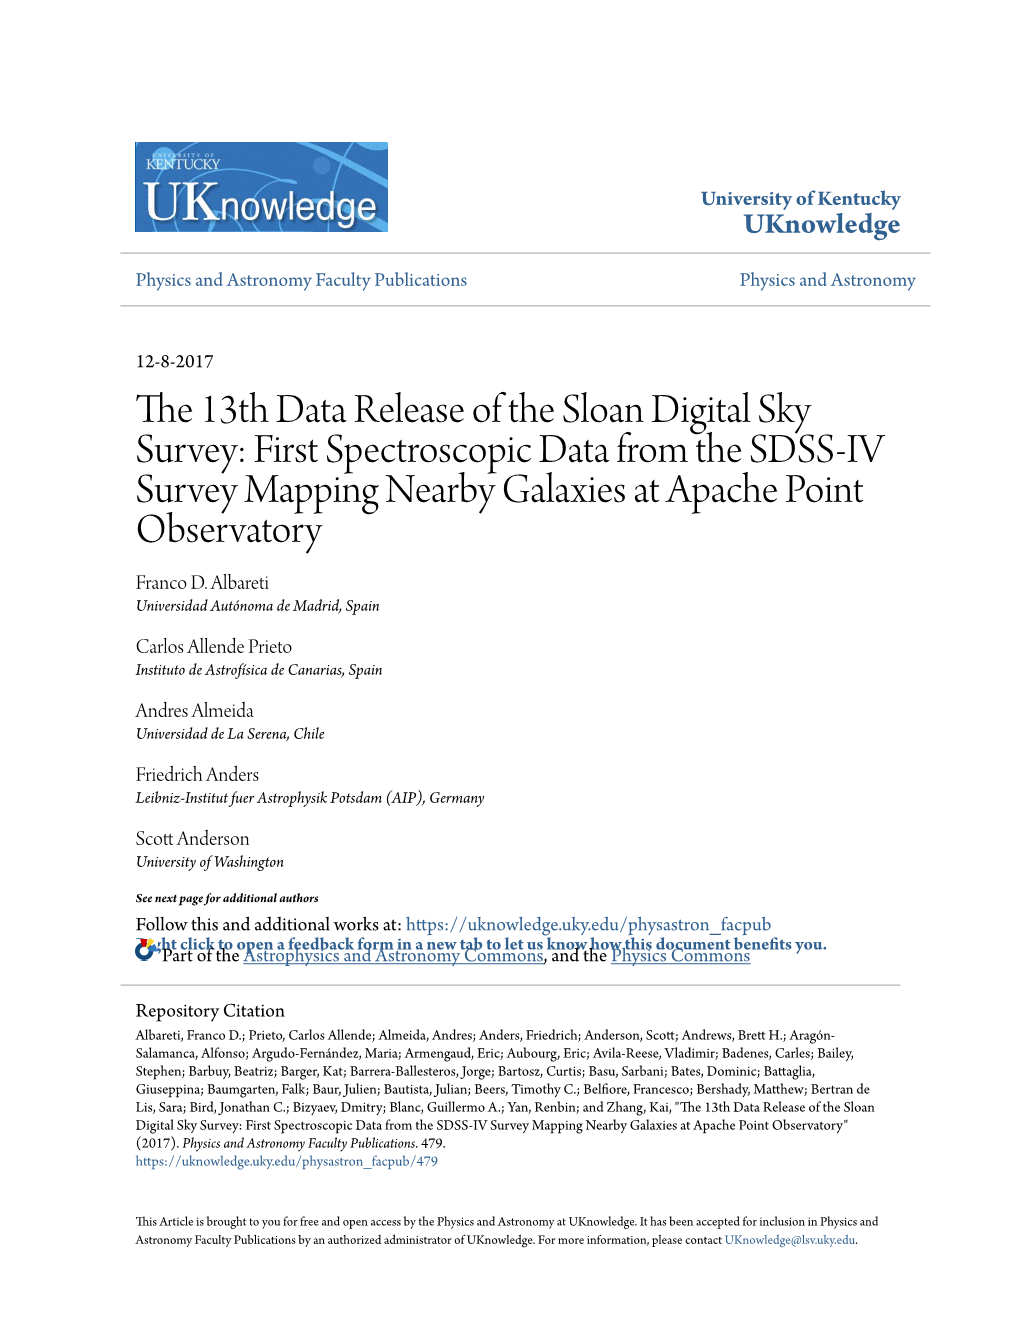 The 13Th Data Release of the Sloan Digital Sky Survey: First Spectroscopic Data from the SDSS-IV Survey Mapping Nearby Galaxies at Apache Point Observatory